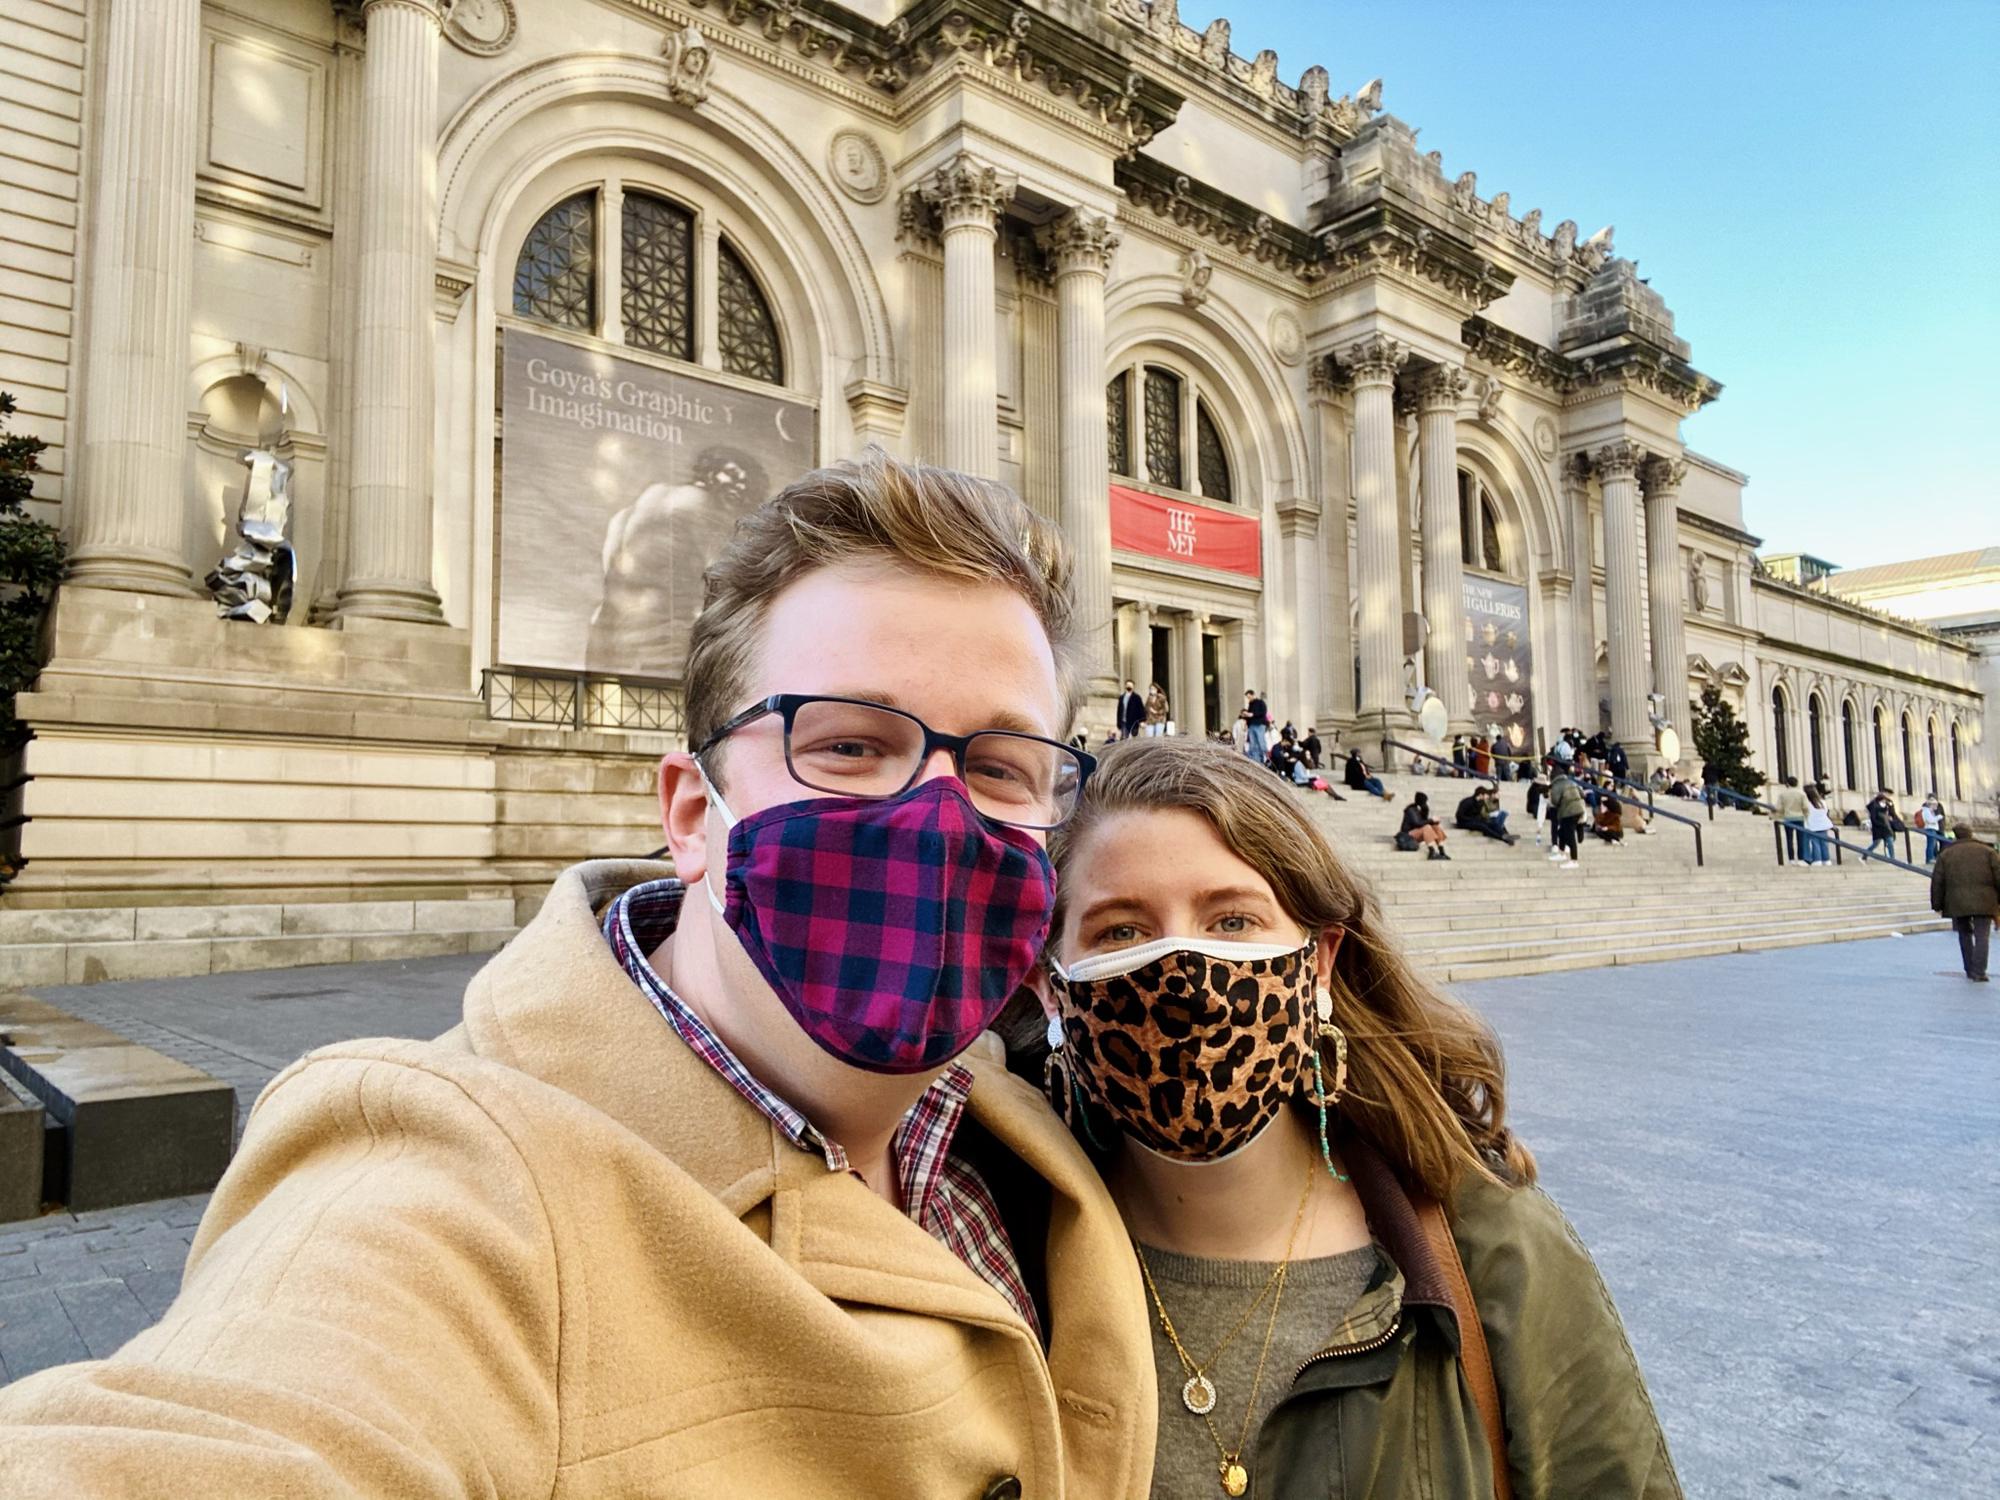 A city-filled day at the Met, early 2021